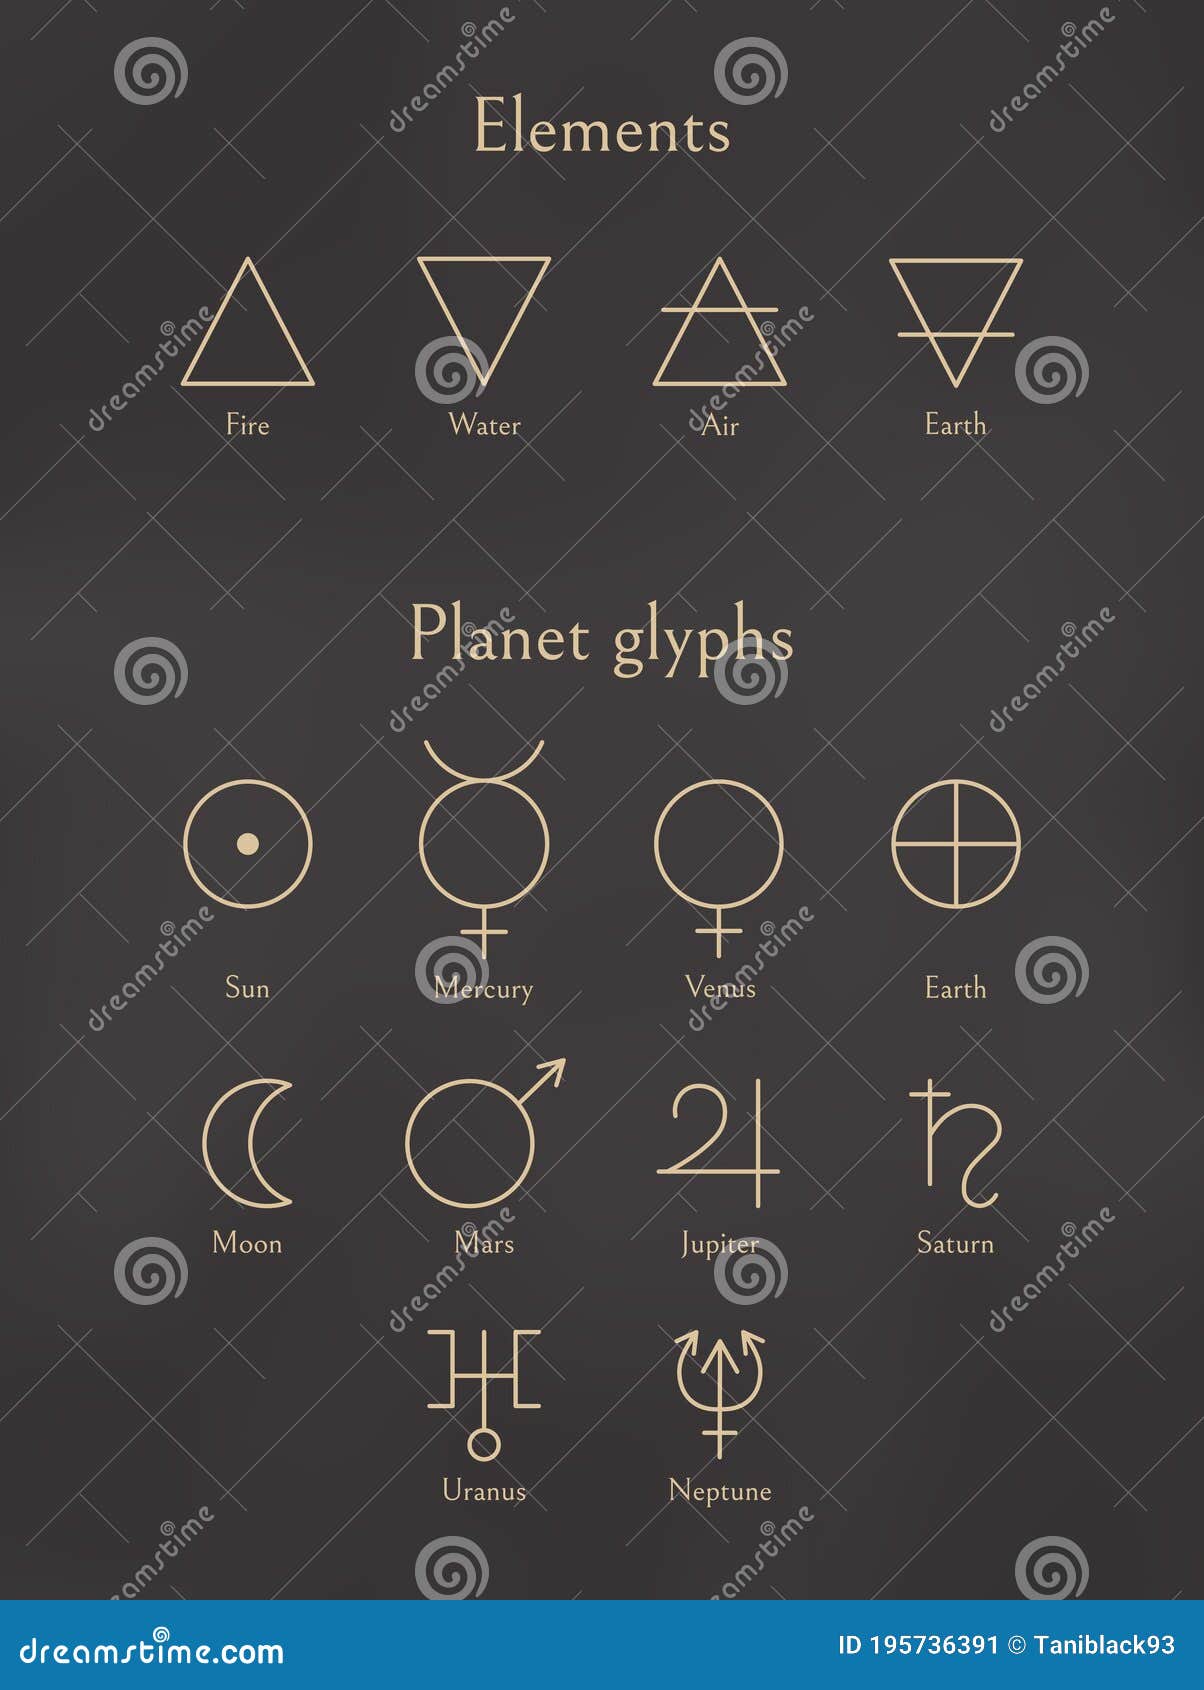 glyphic's collection